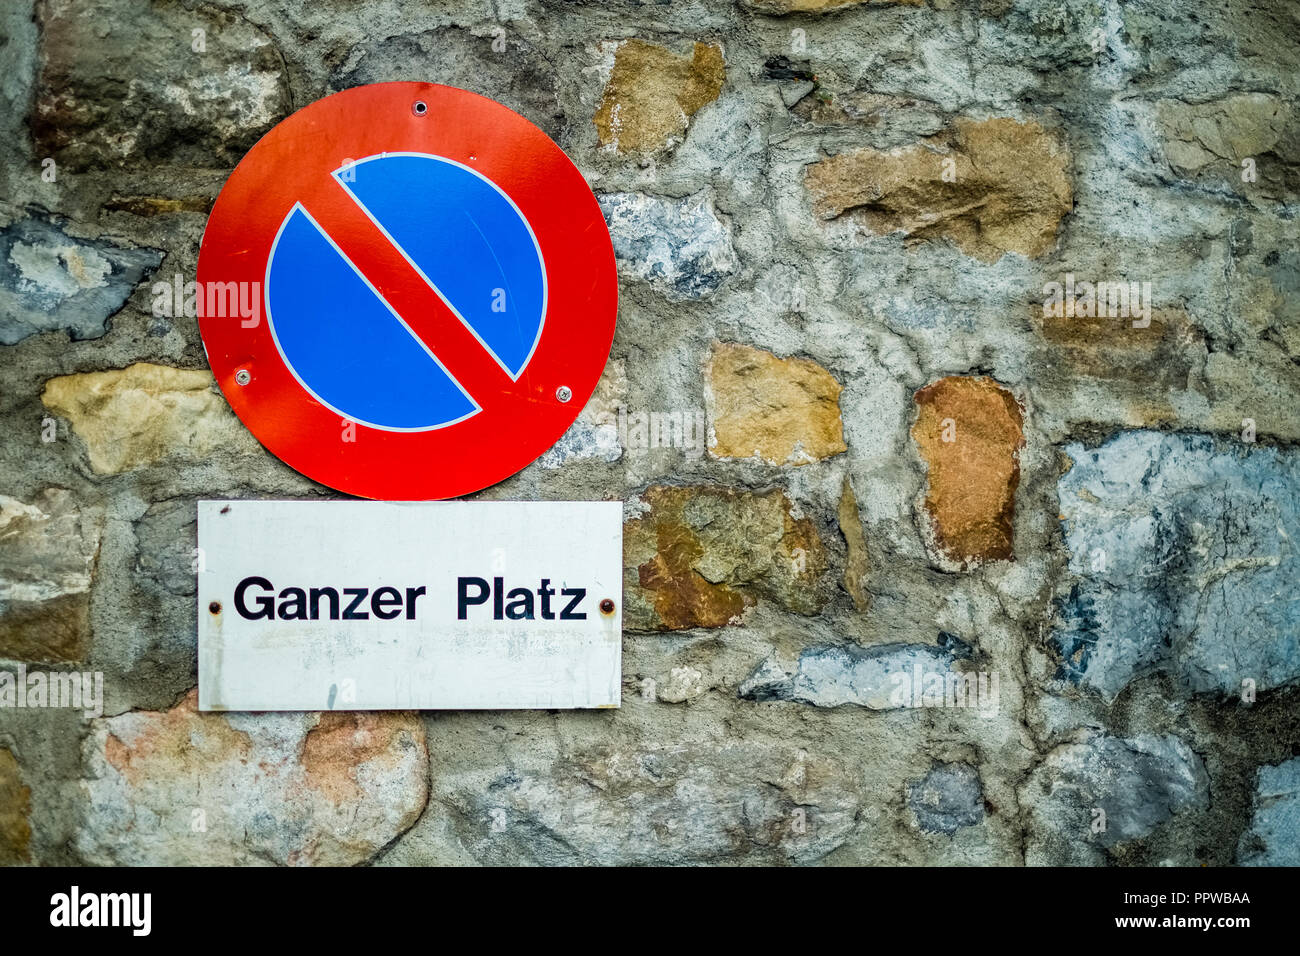 Against a brick wall in the Swiss city of Lucerne a red and blue sign is indicating that no parking is allowed on this square. Stock Photo